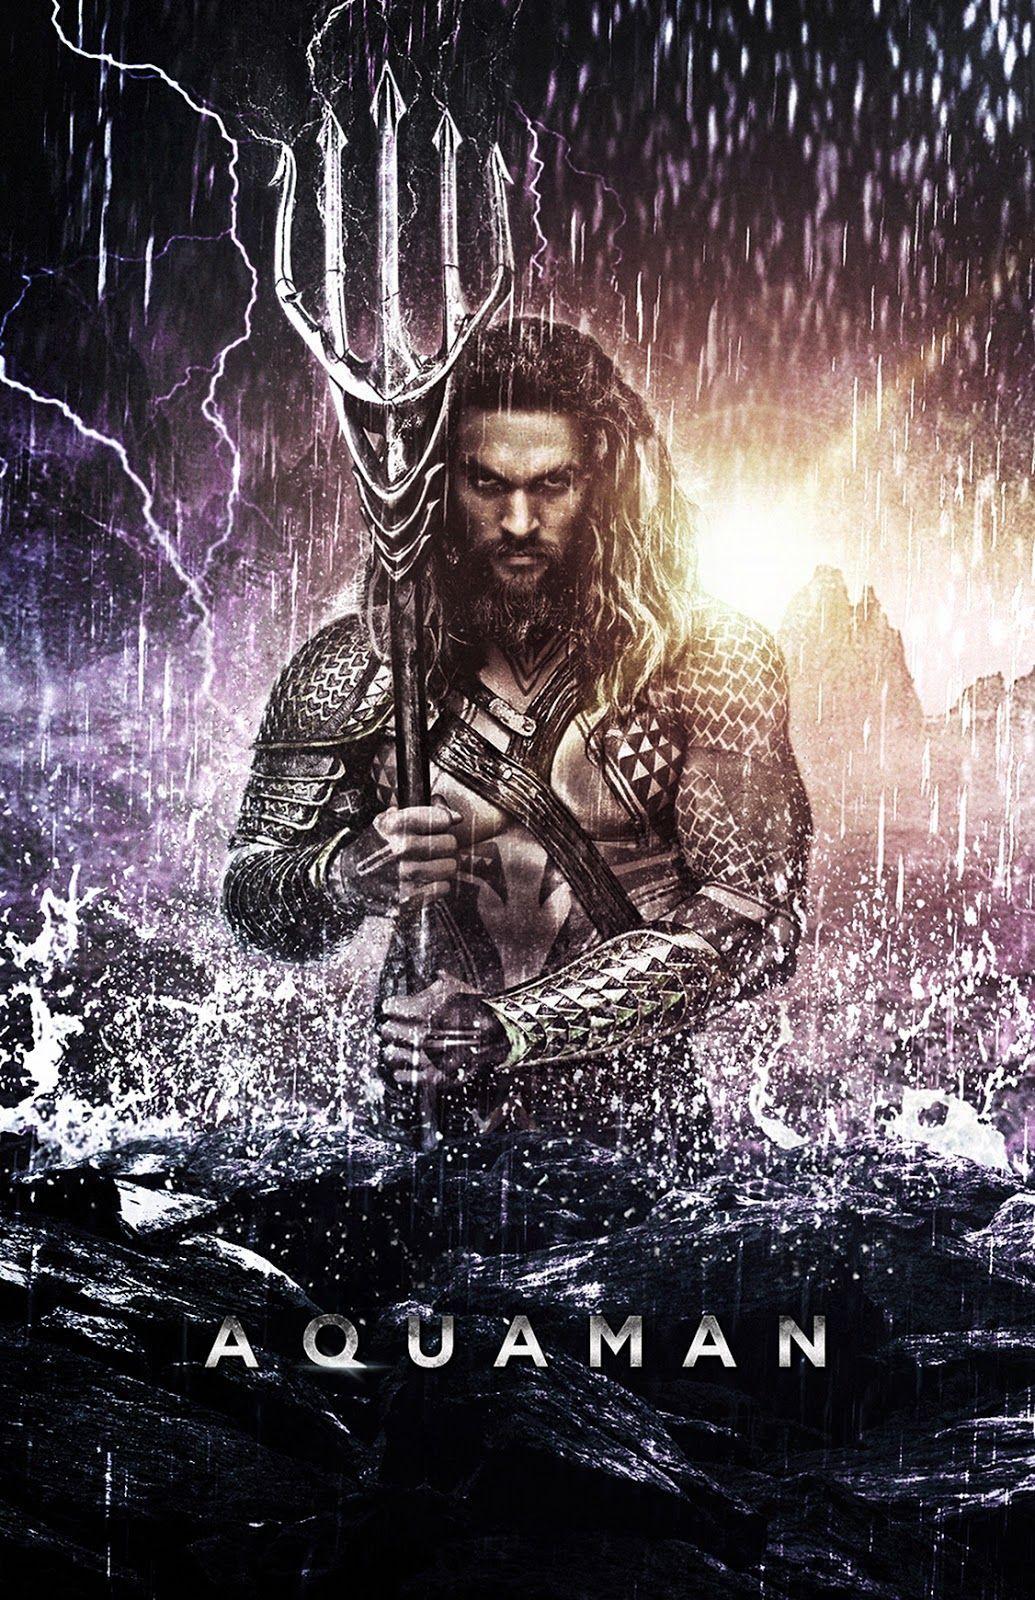 Aquaman (27th July 2018) (1035 x 1600 HD Wallpaper From Gallsource